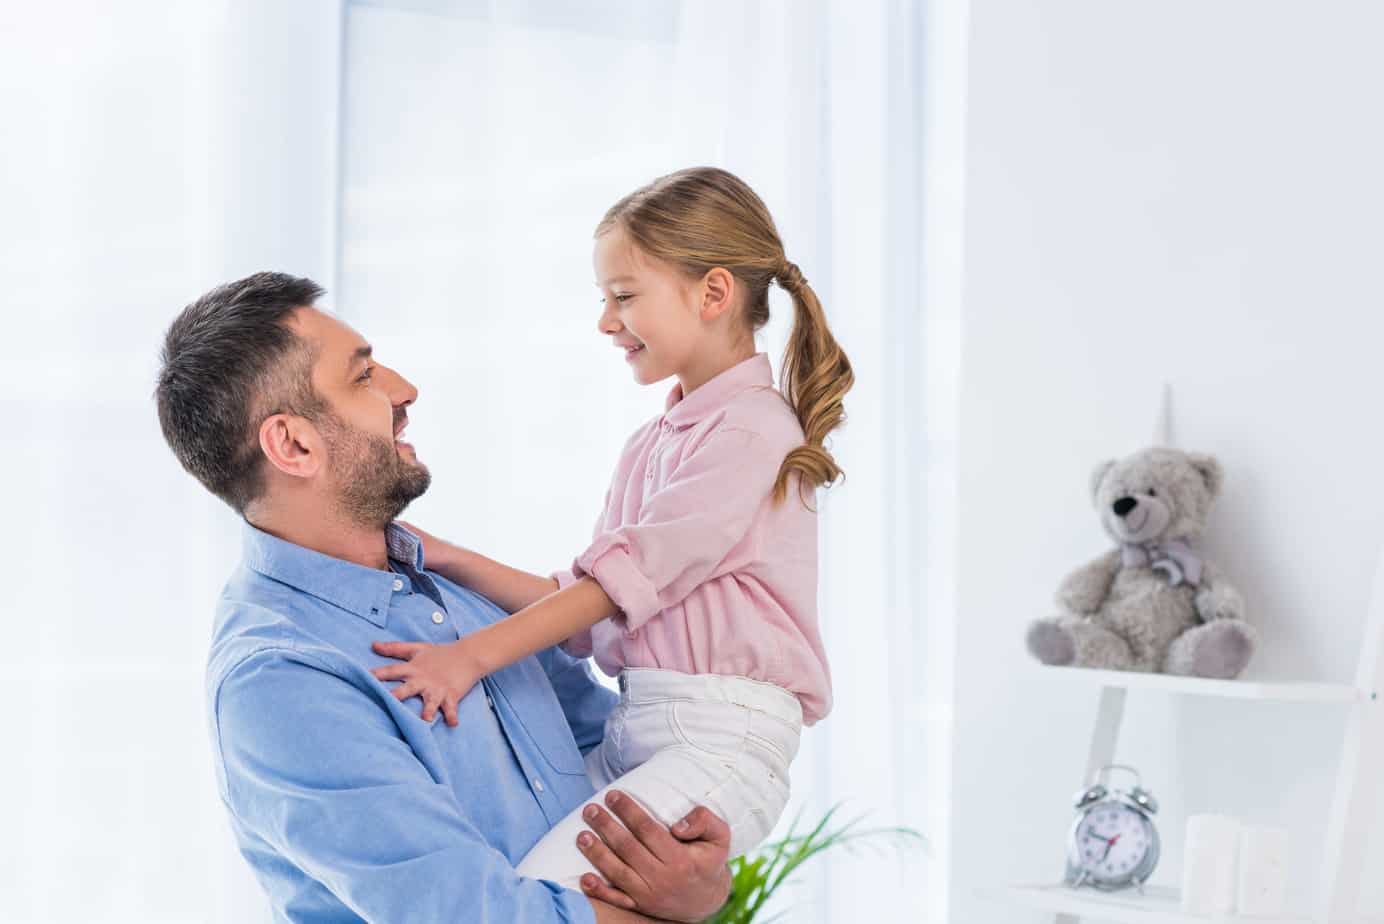 how soon to introduce child to new partner